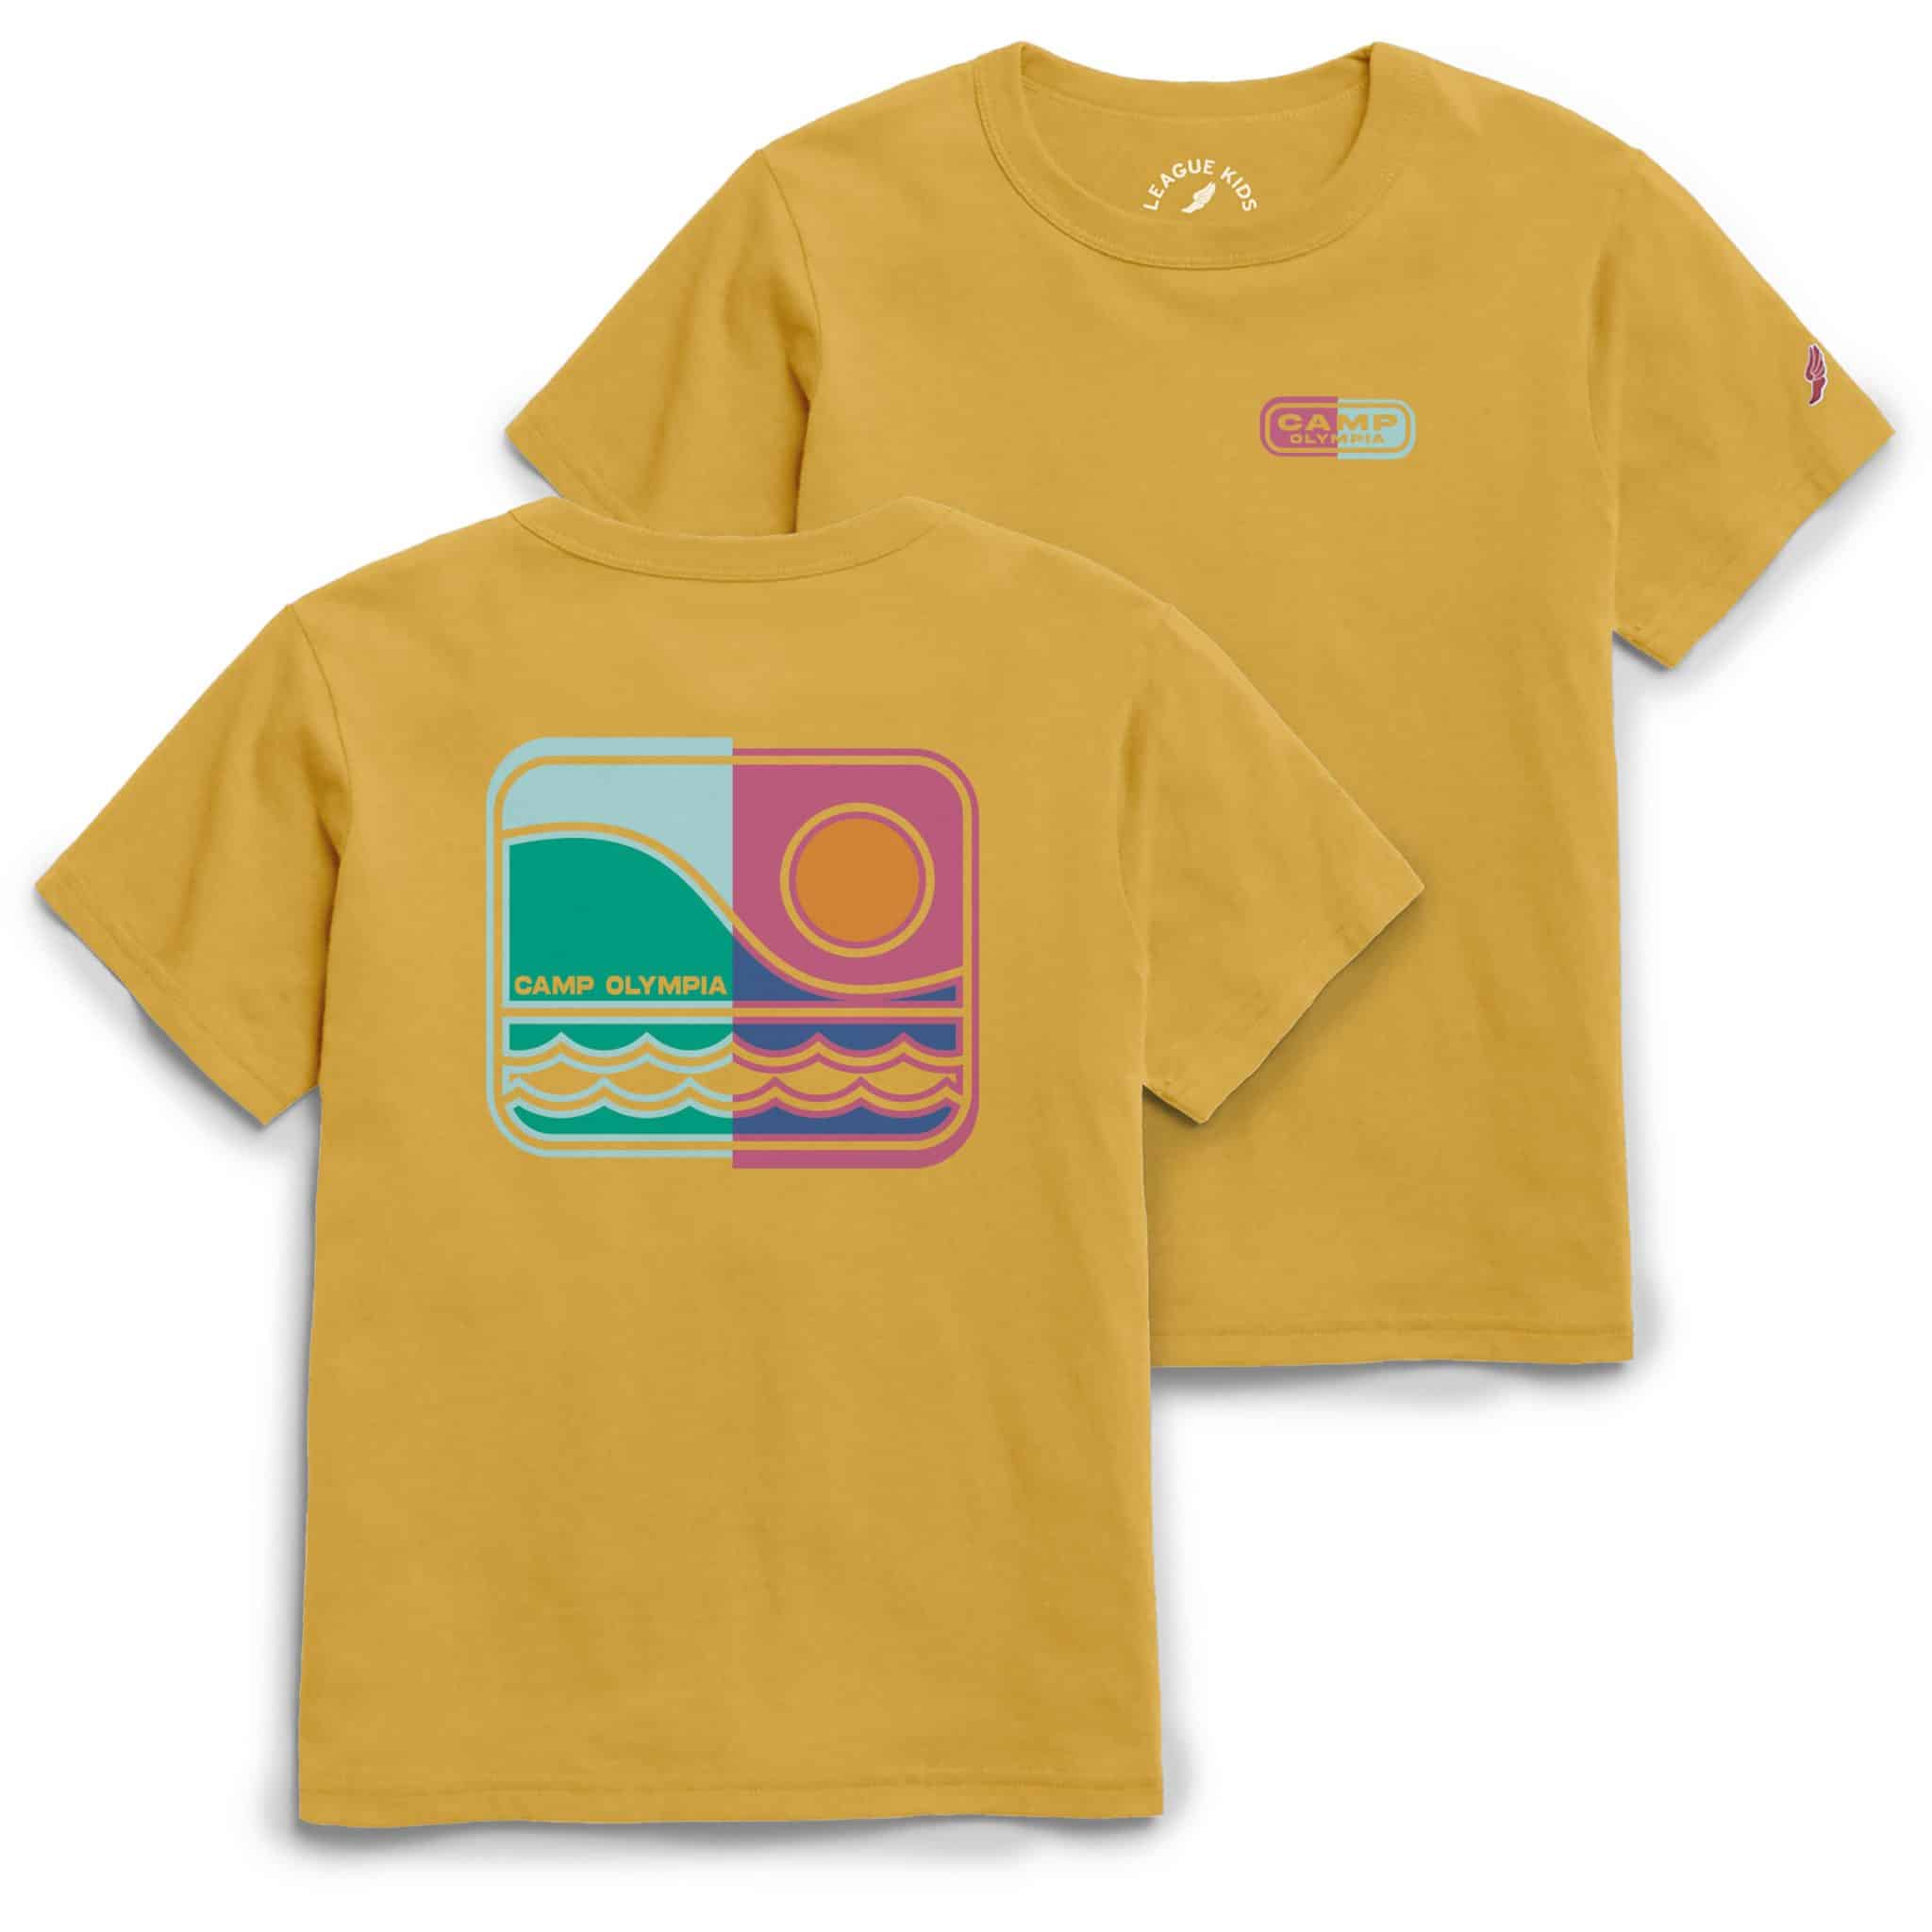 Camp Olympia Yellow T-shirt with Sun and Wave graphic